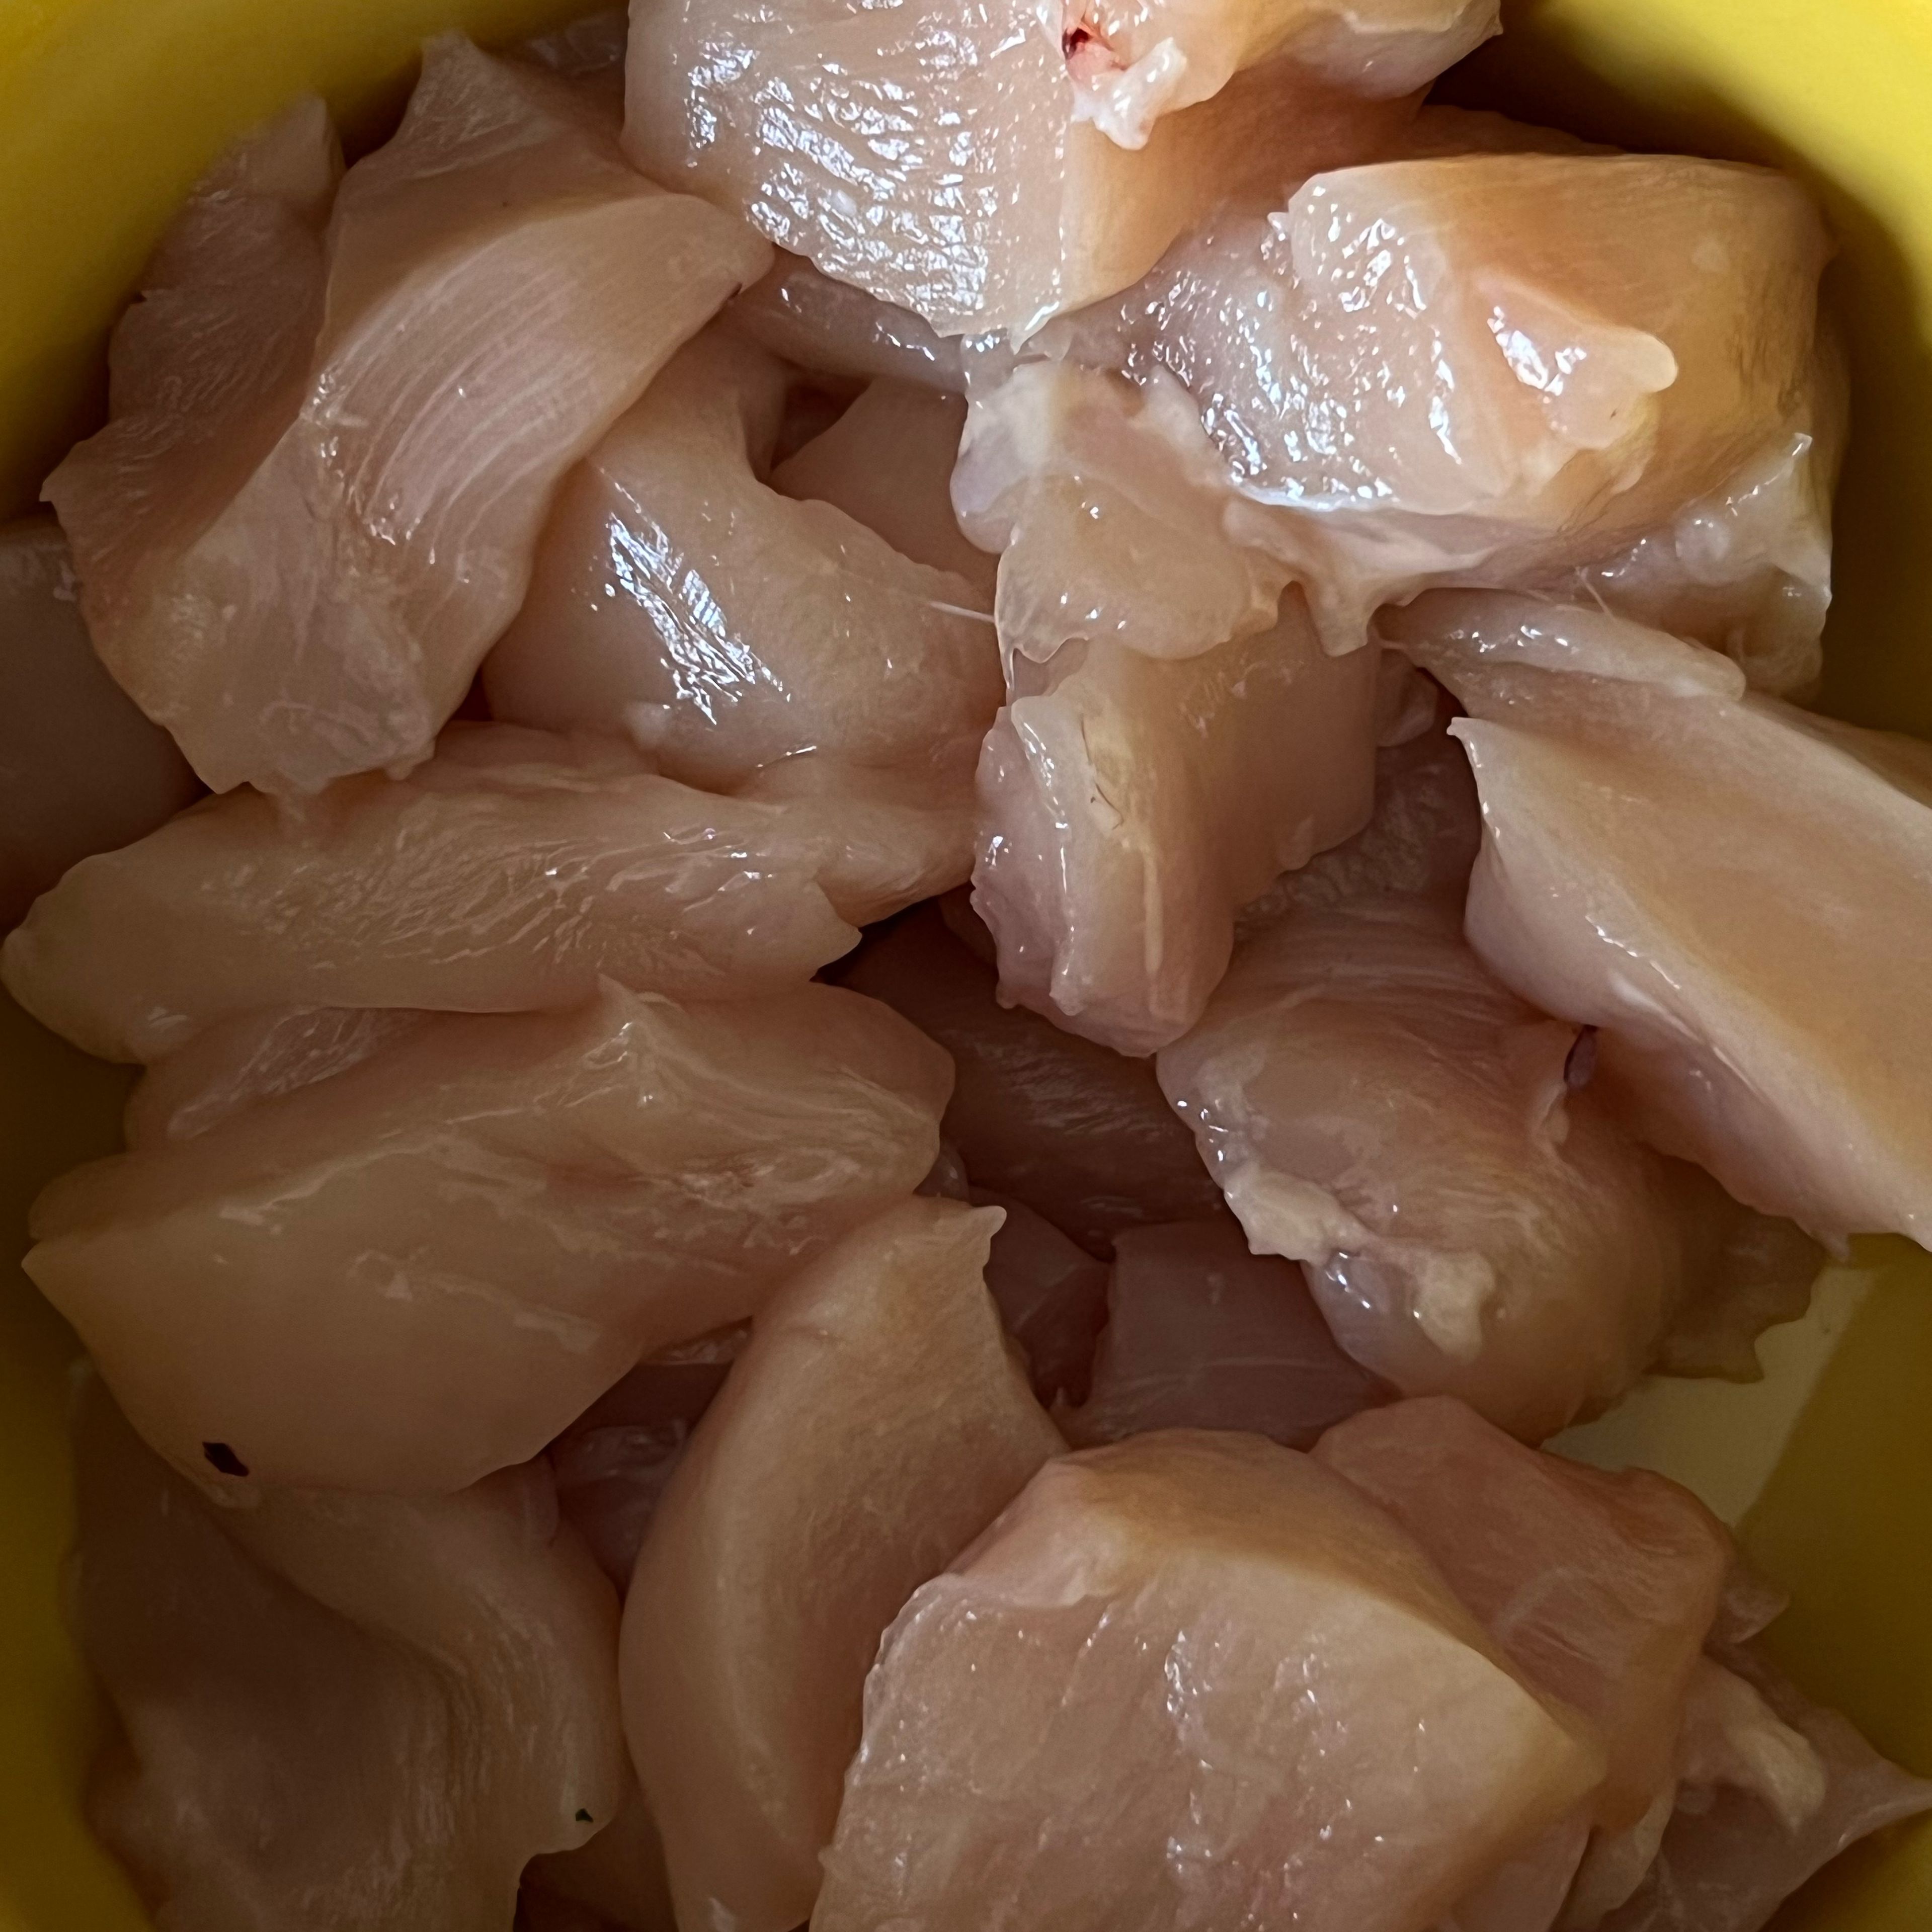 Cut your two slices of chicken into cubes and place them in a separate bowl.